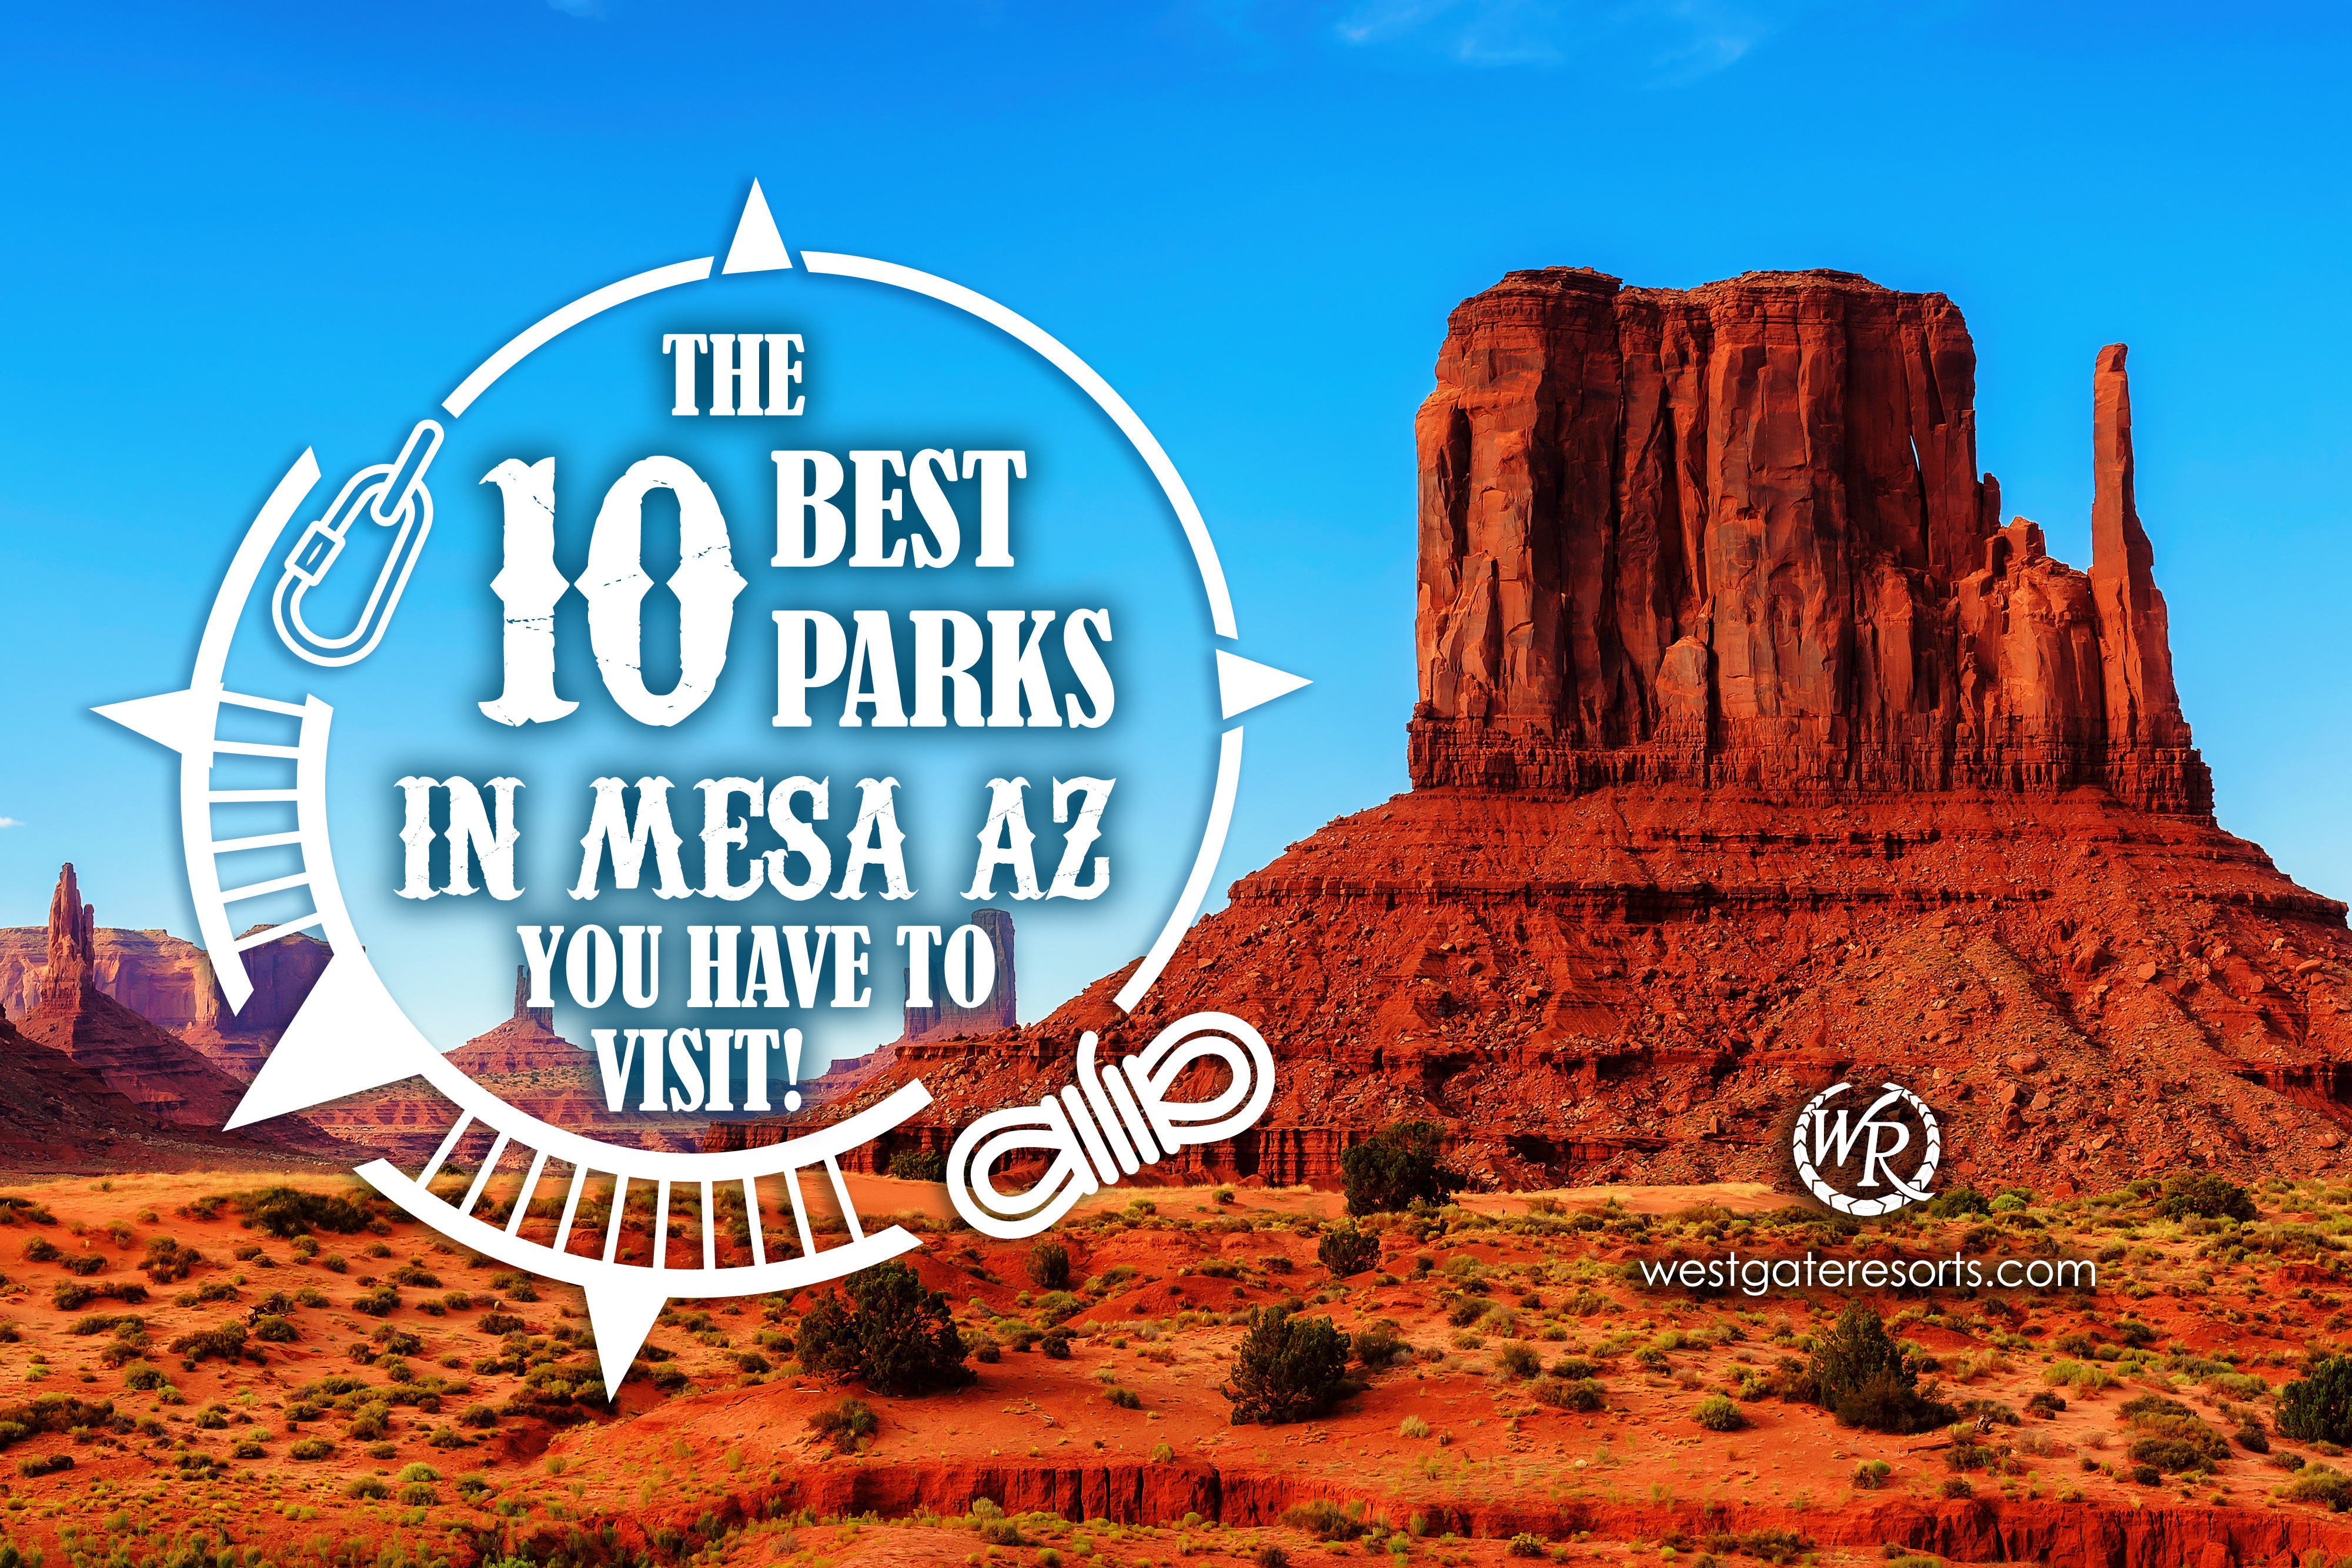 The 10 Best Parks in Mesa AZ You Have to Visit!